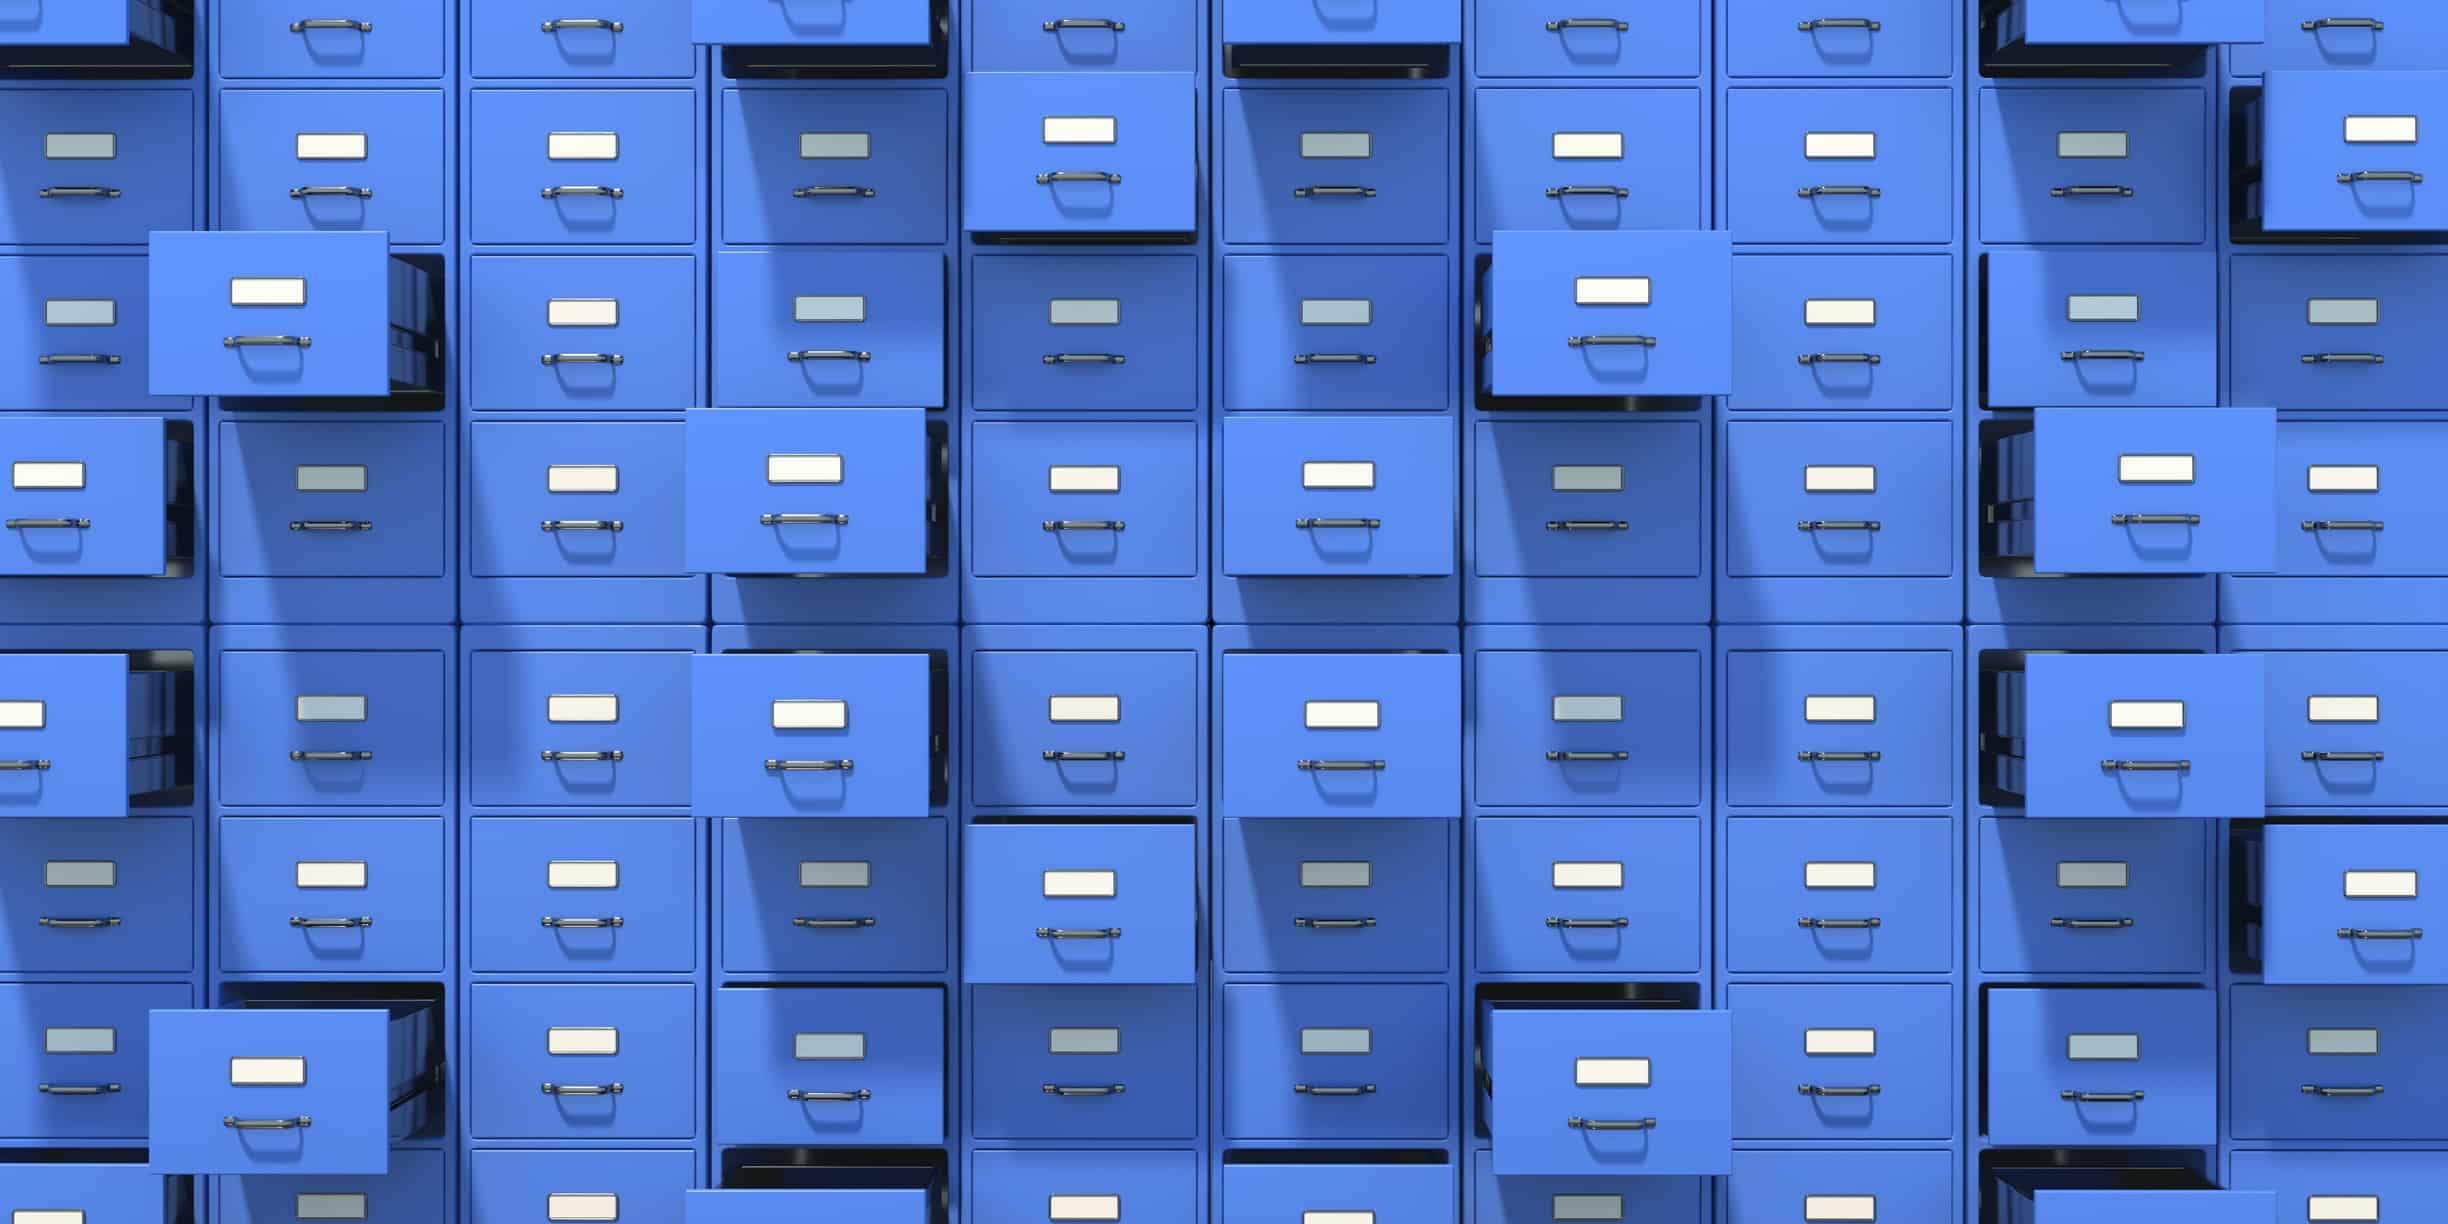 How to Archive Hard Copy Documents: The Quick and Easy Guide